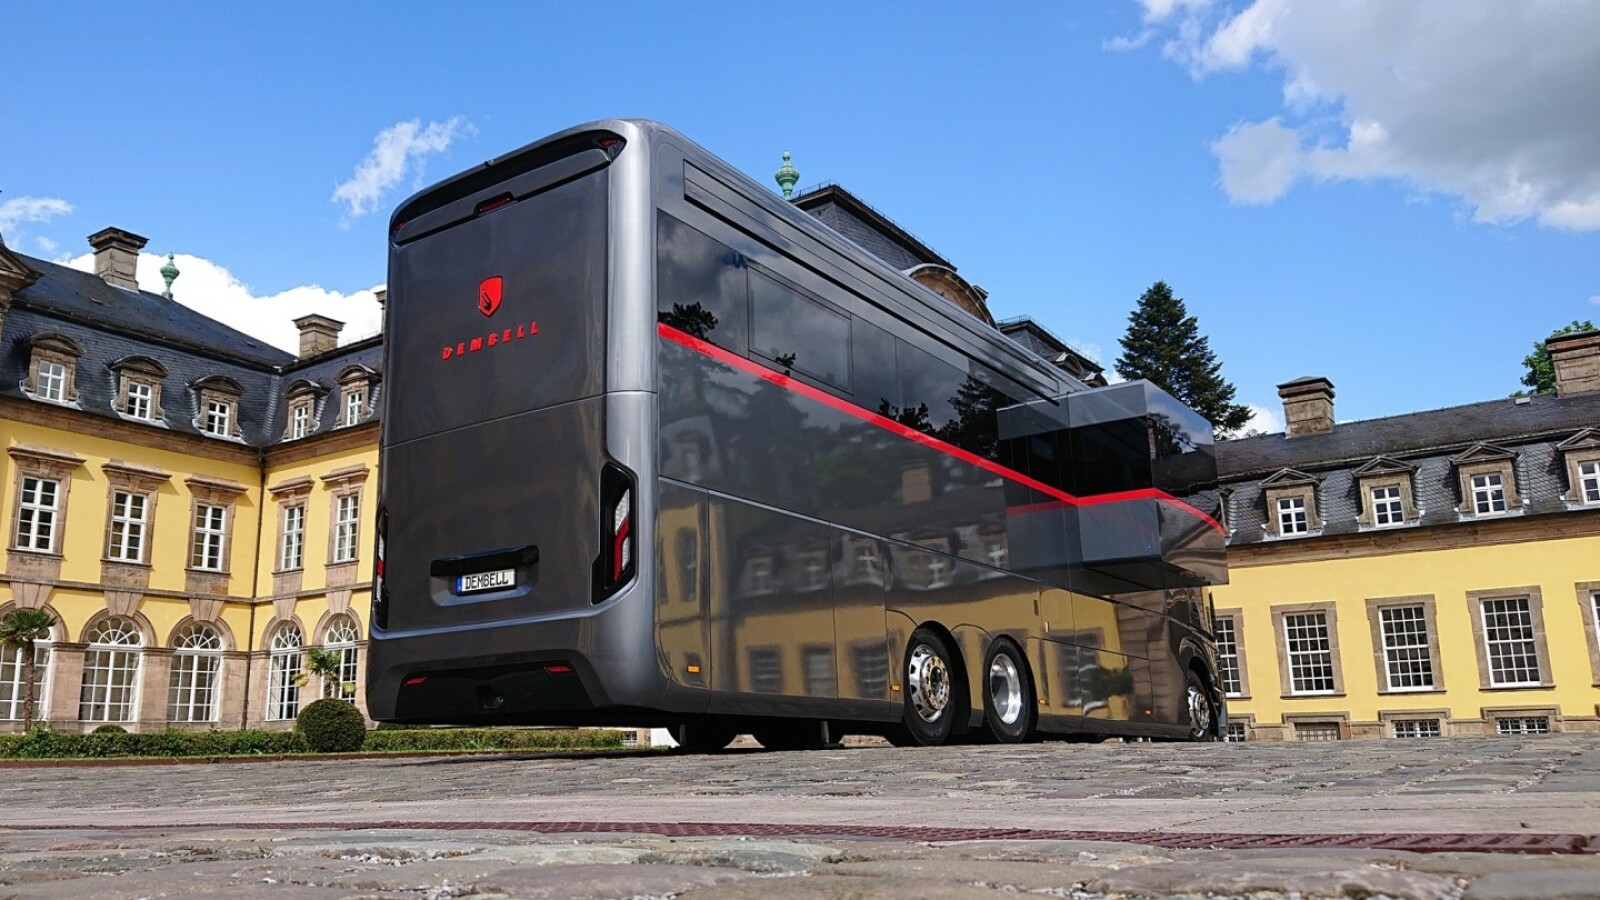 Dembell Motorhome model m Chassis: Mercedes Actros